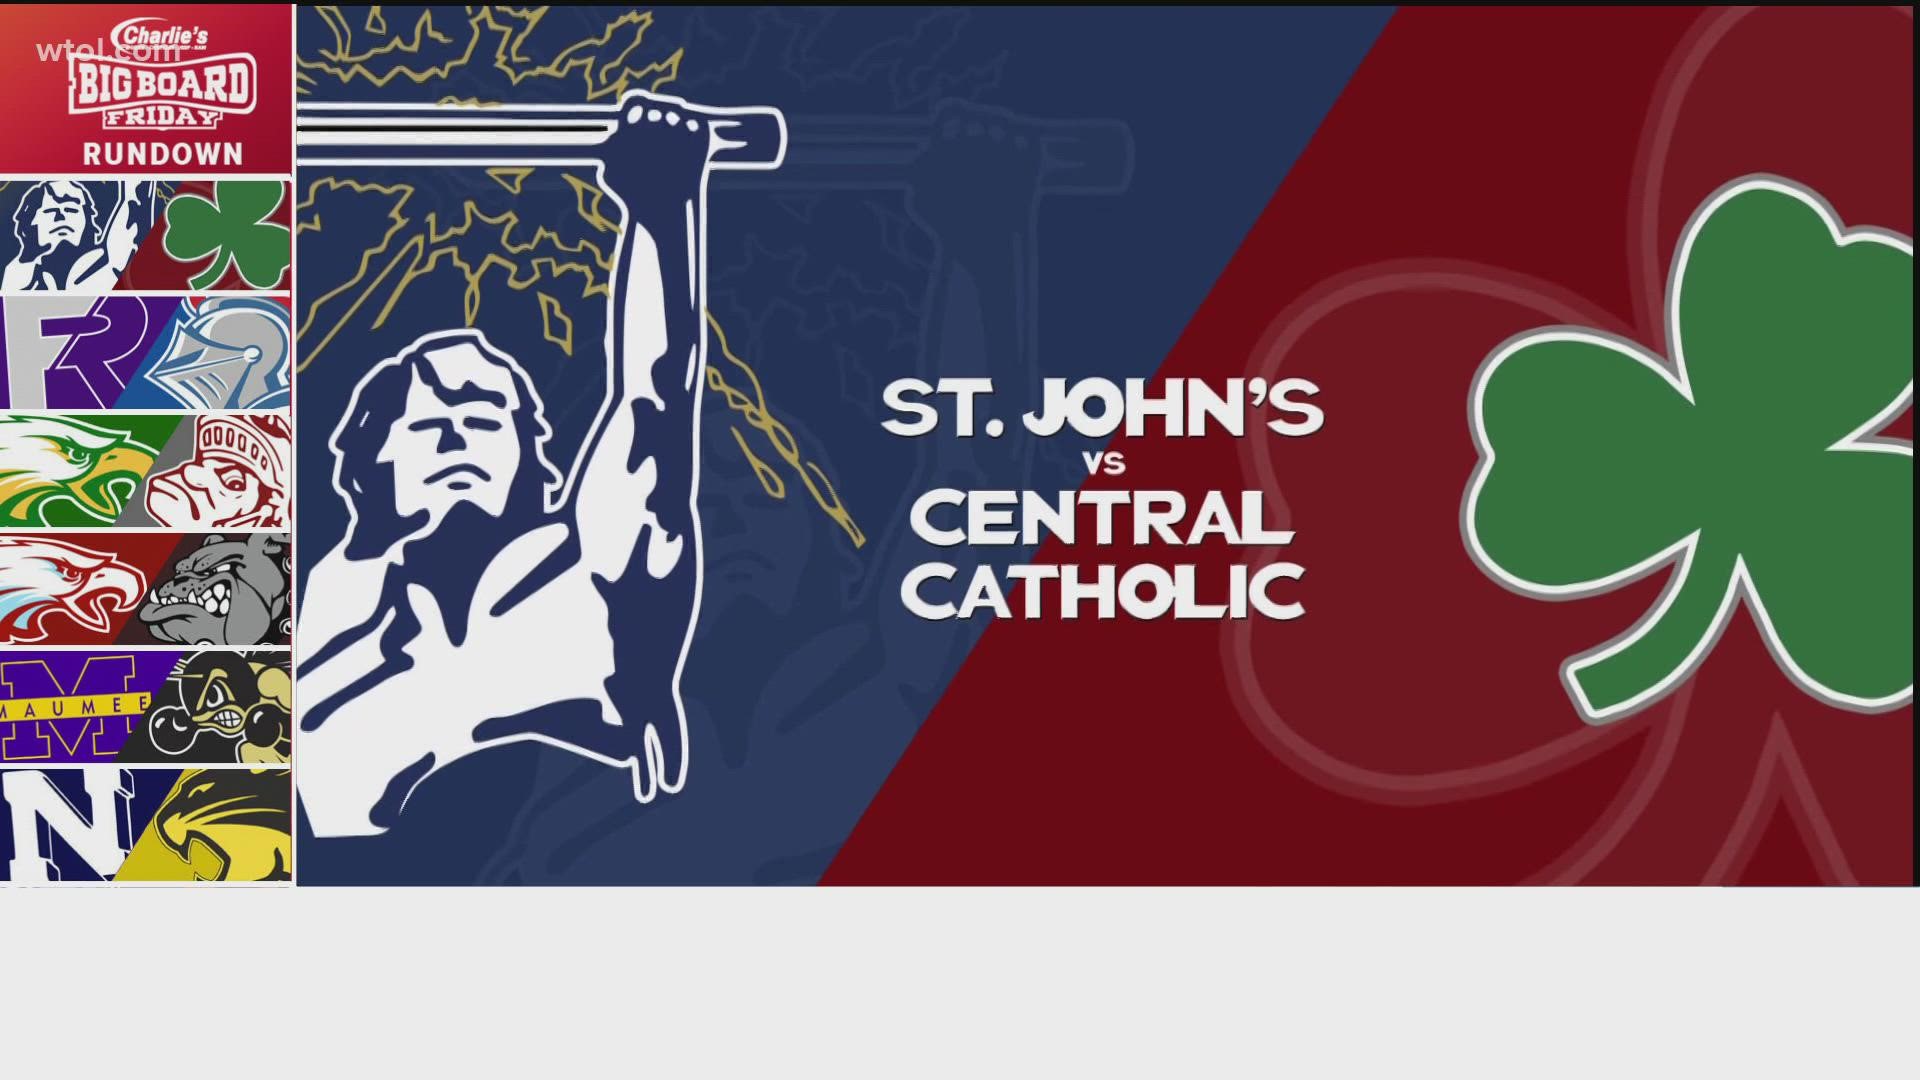 Central Catholic pulled away late in the game.